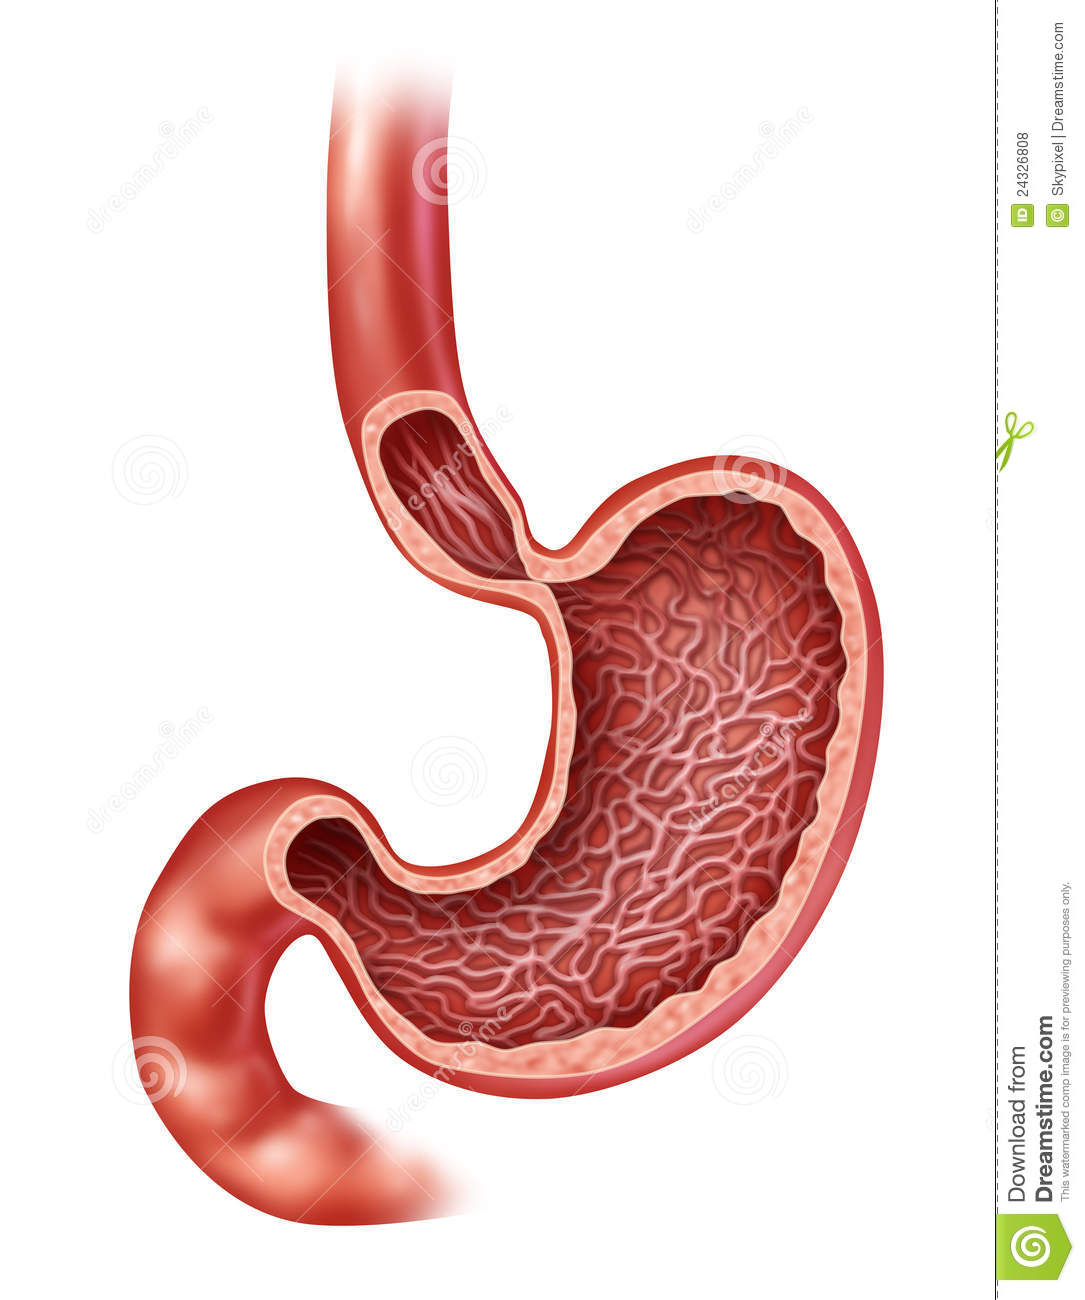 Stomach Anatomy Of The Human Internal Digestive Organ With A Medical    